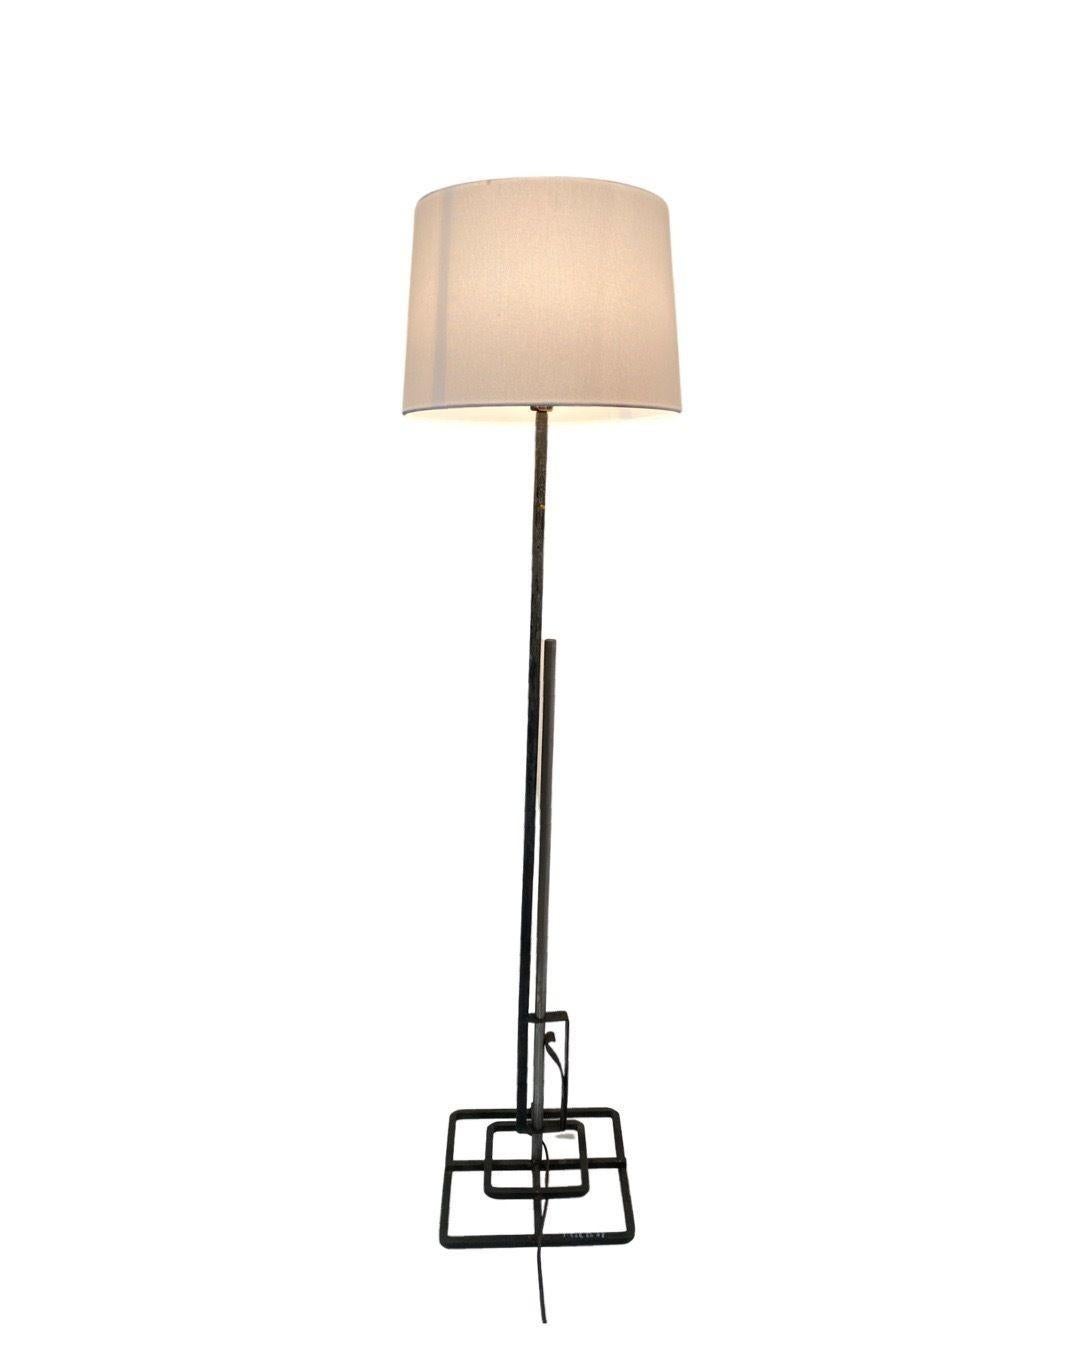 Late Mission style adjustable cast wrought iron floor lamp w replacement lamp shade included. The lamp features a square target base with polished steel and an iron center post. 
Circa 1920.
 